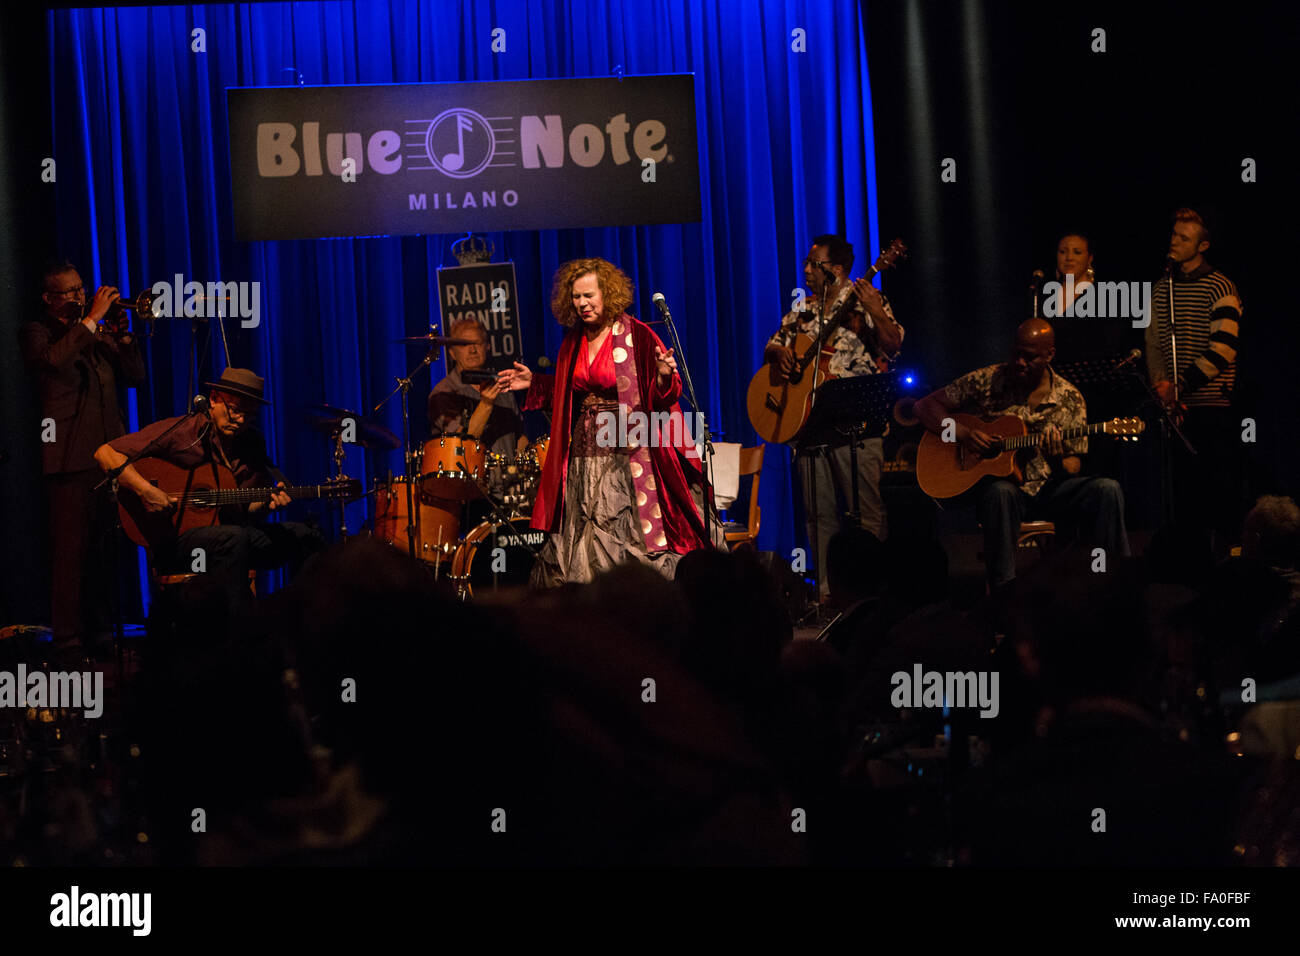 Milan Italy. 18th December 2015. The English singer and songwriter SARAH JANE MORRIS performs live on stage at Blue Note Credit:  Rodolfo Sassano/Alamy Live News Stock Photo